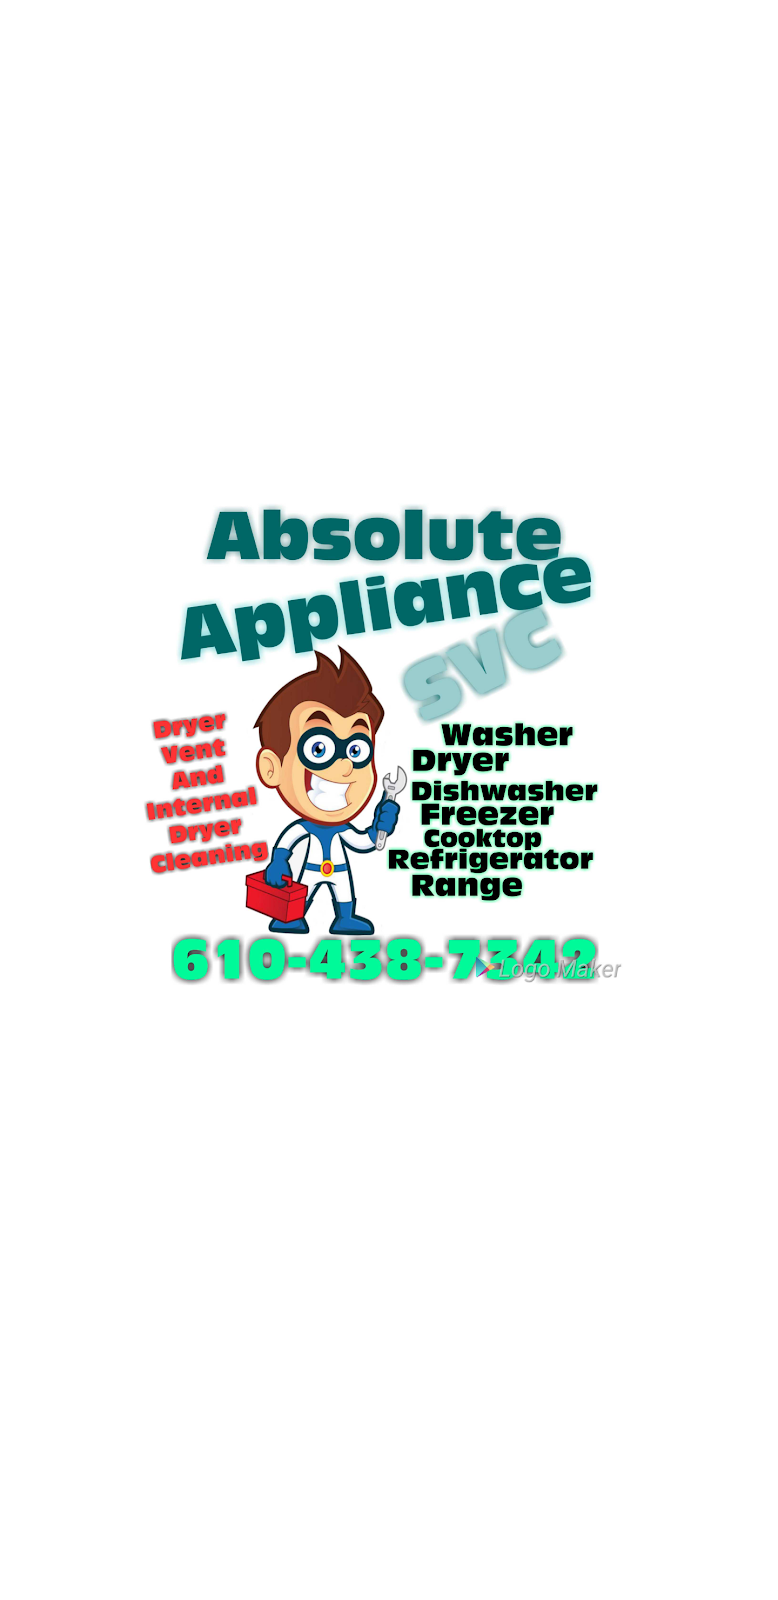 Absolute Appliance SVC | 328 Lehigh Dr, Easton, PA 18042 | Phone: (610) 438-7342